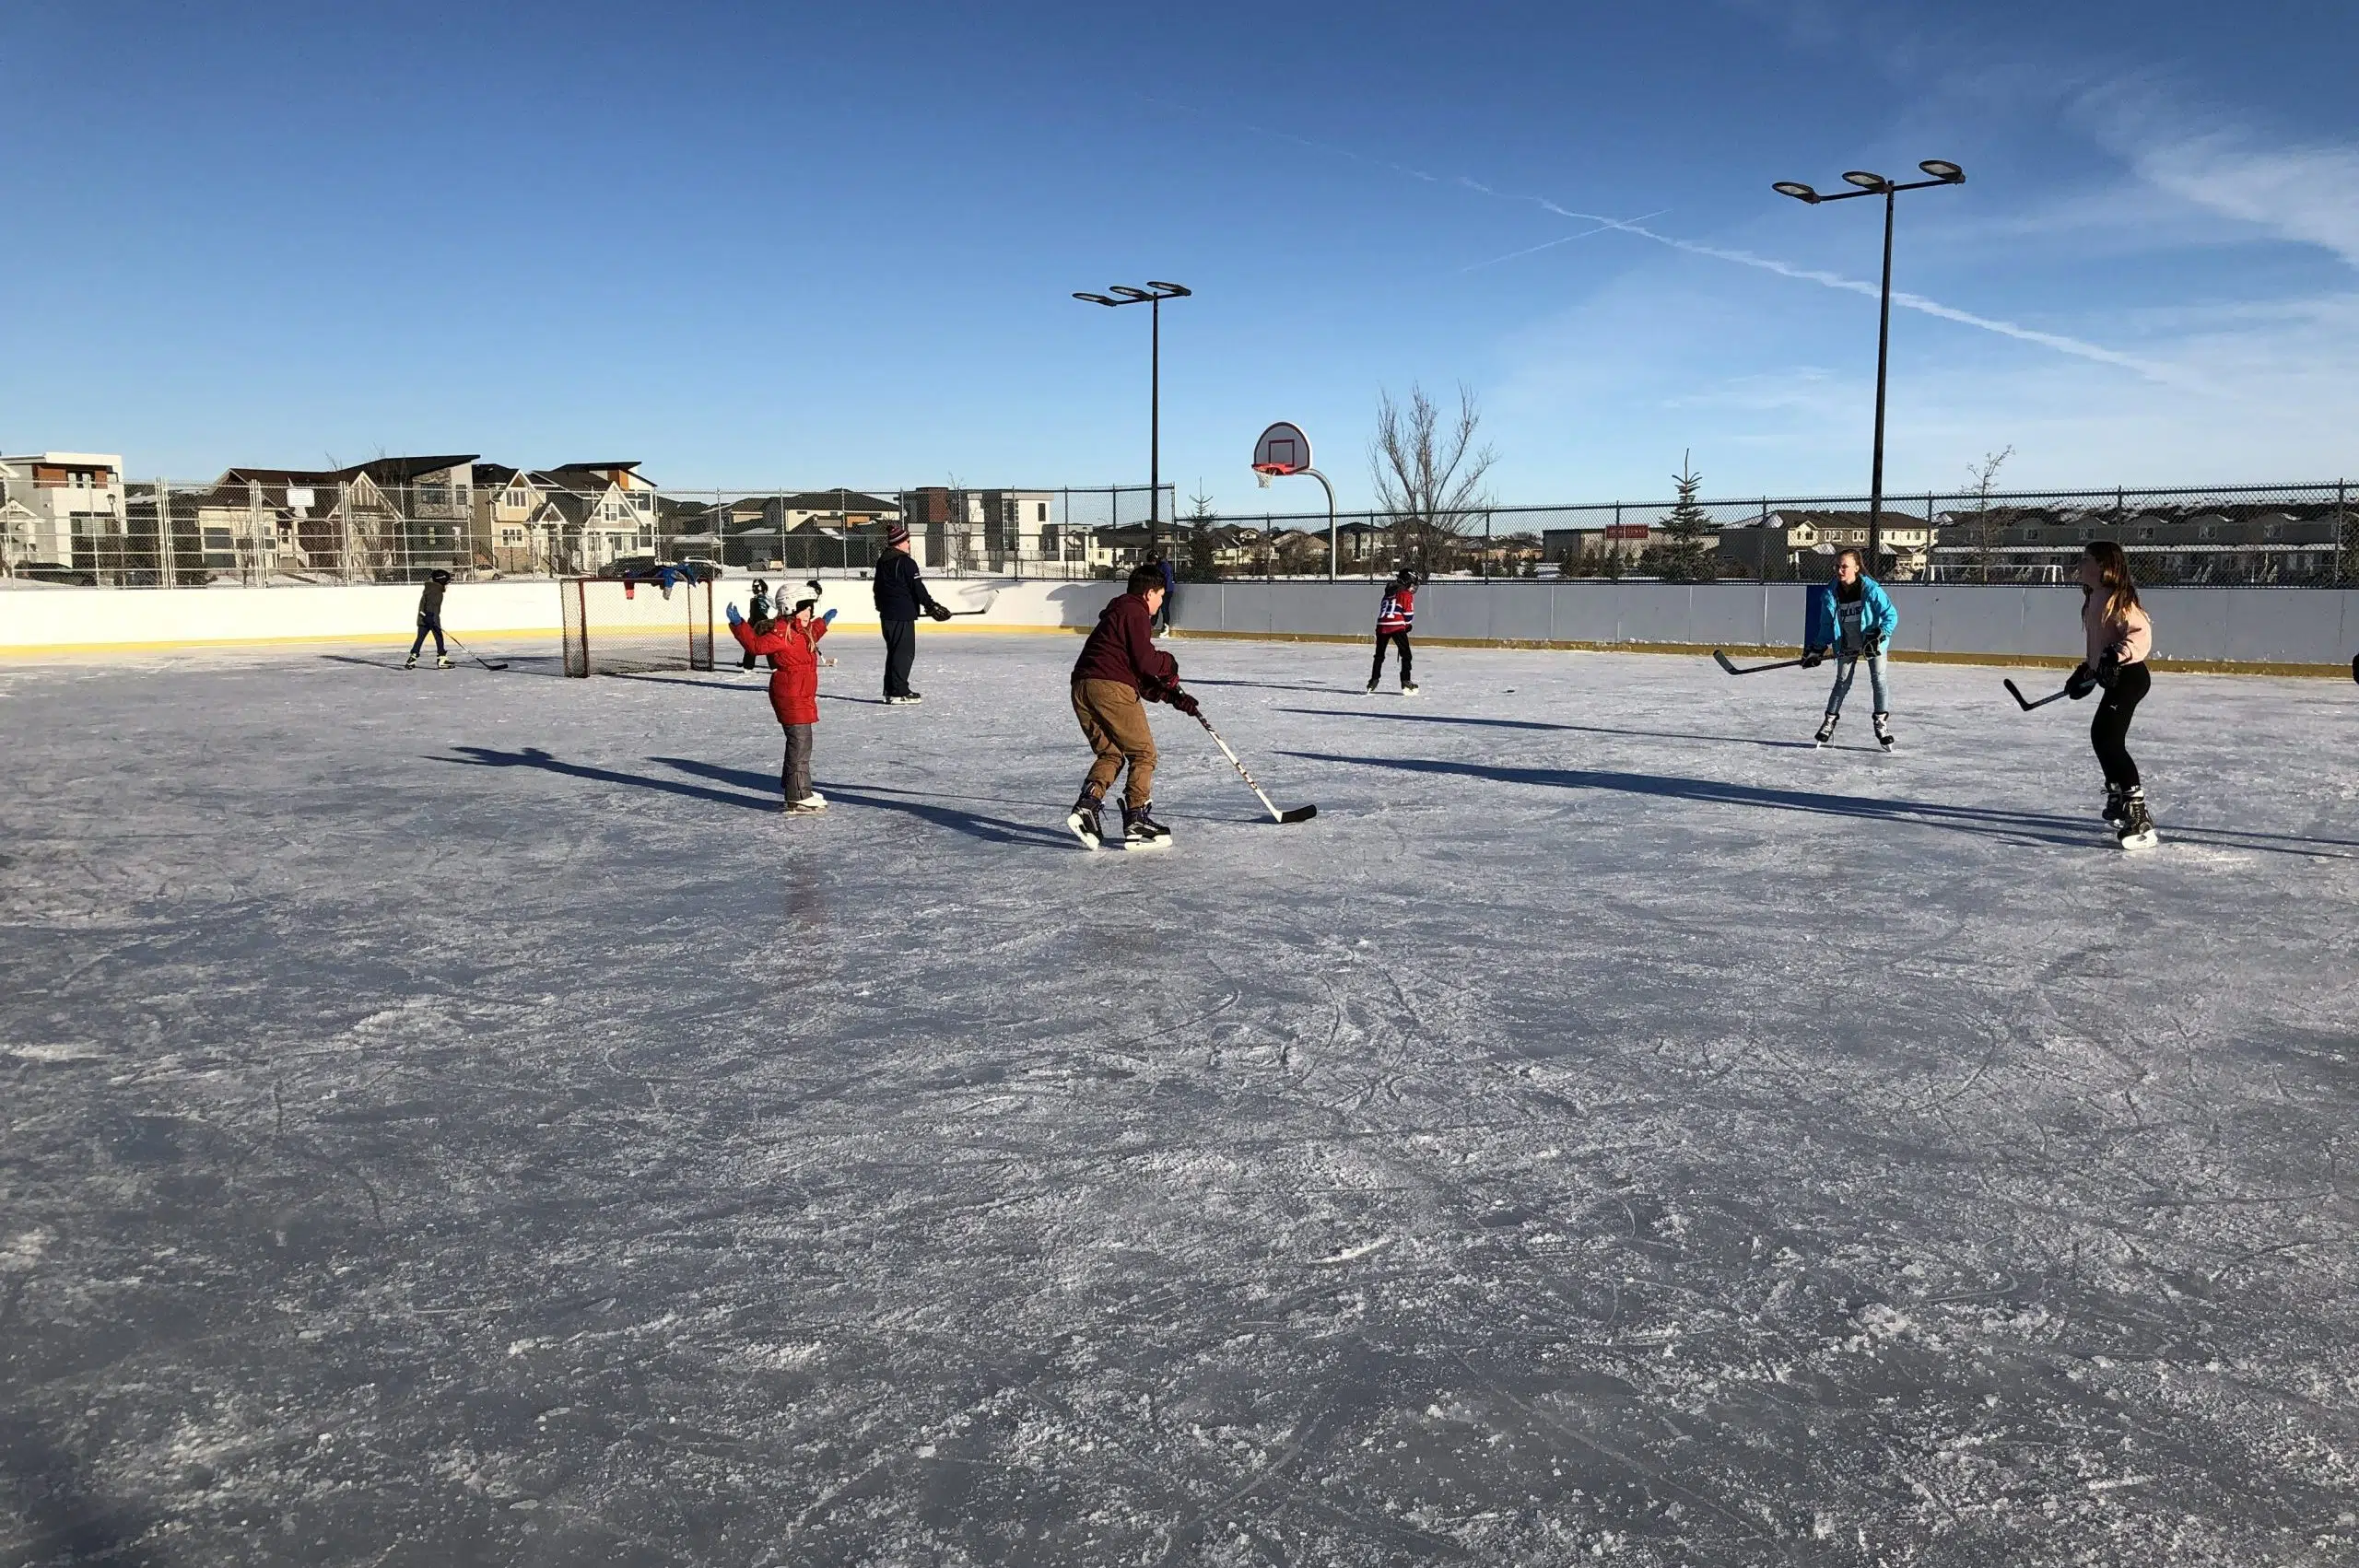 'Summer with snow': outdoor rinks popular under the warm sun